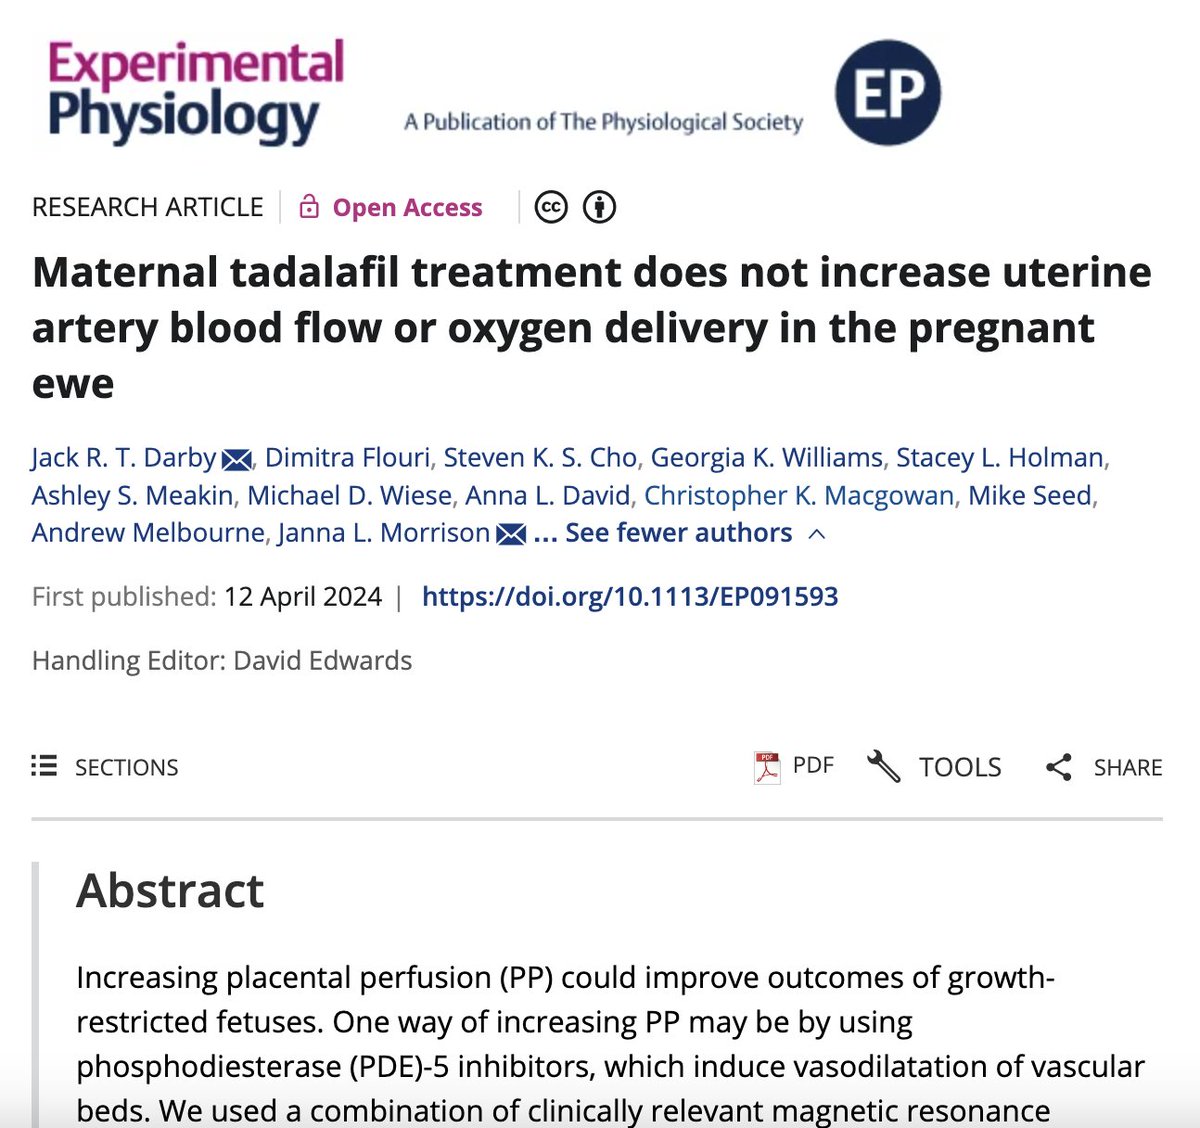 #NewPaper supported by NIF @sahmriAU: Maternal tadalafil treatment does not increase uterine artery blood flow or oxygen delivery in the pregnant ewe doi.org/10.1113/EP0915… @ProfessorJanna @JackRTDarby @asmeakin @WieseMD @PrenatalTherapy @cmacgowan @UniversitySA